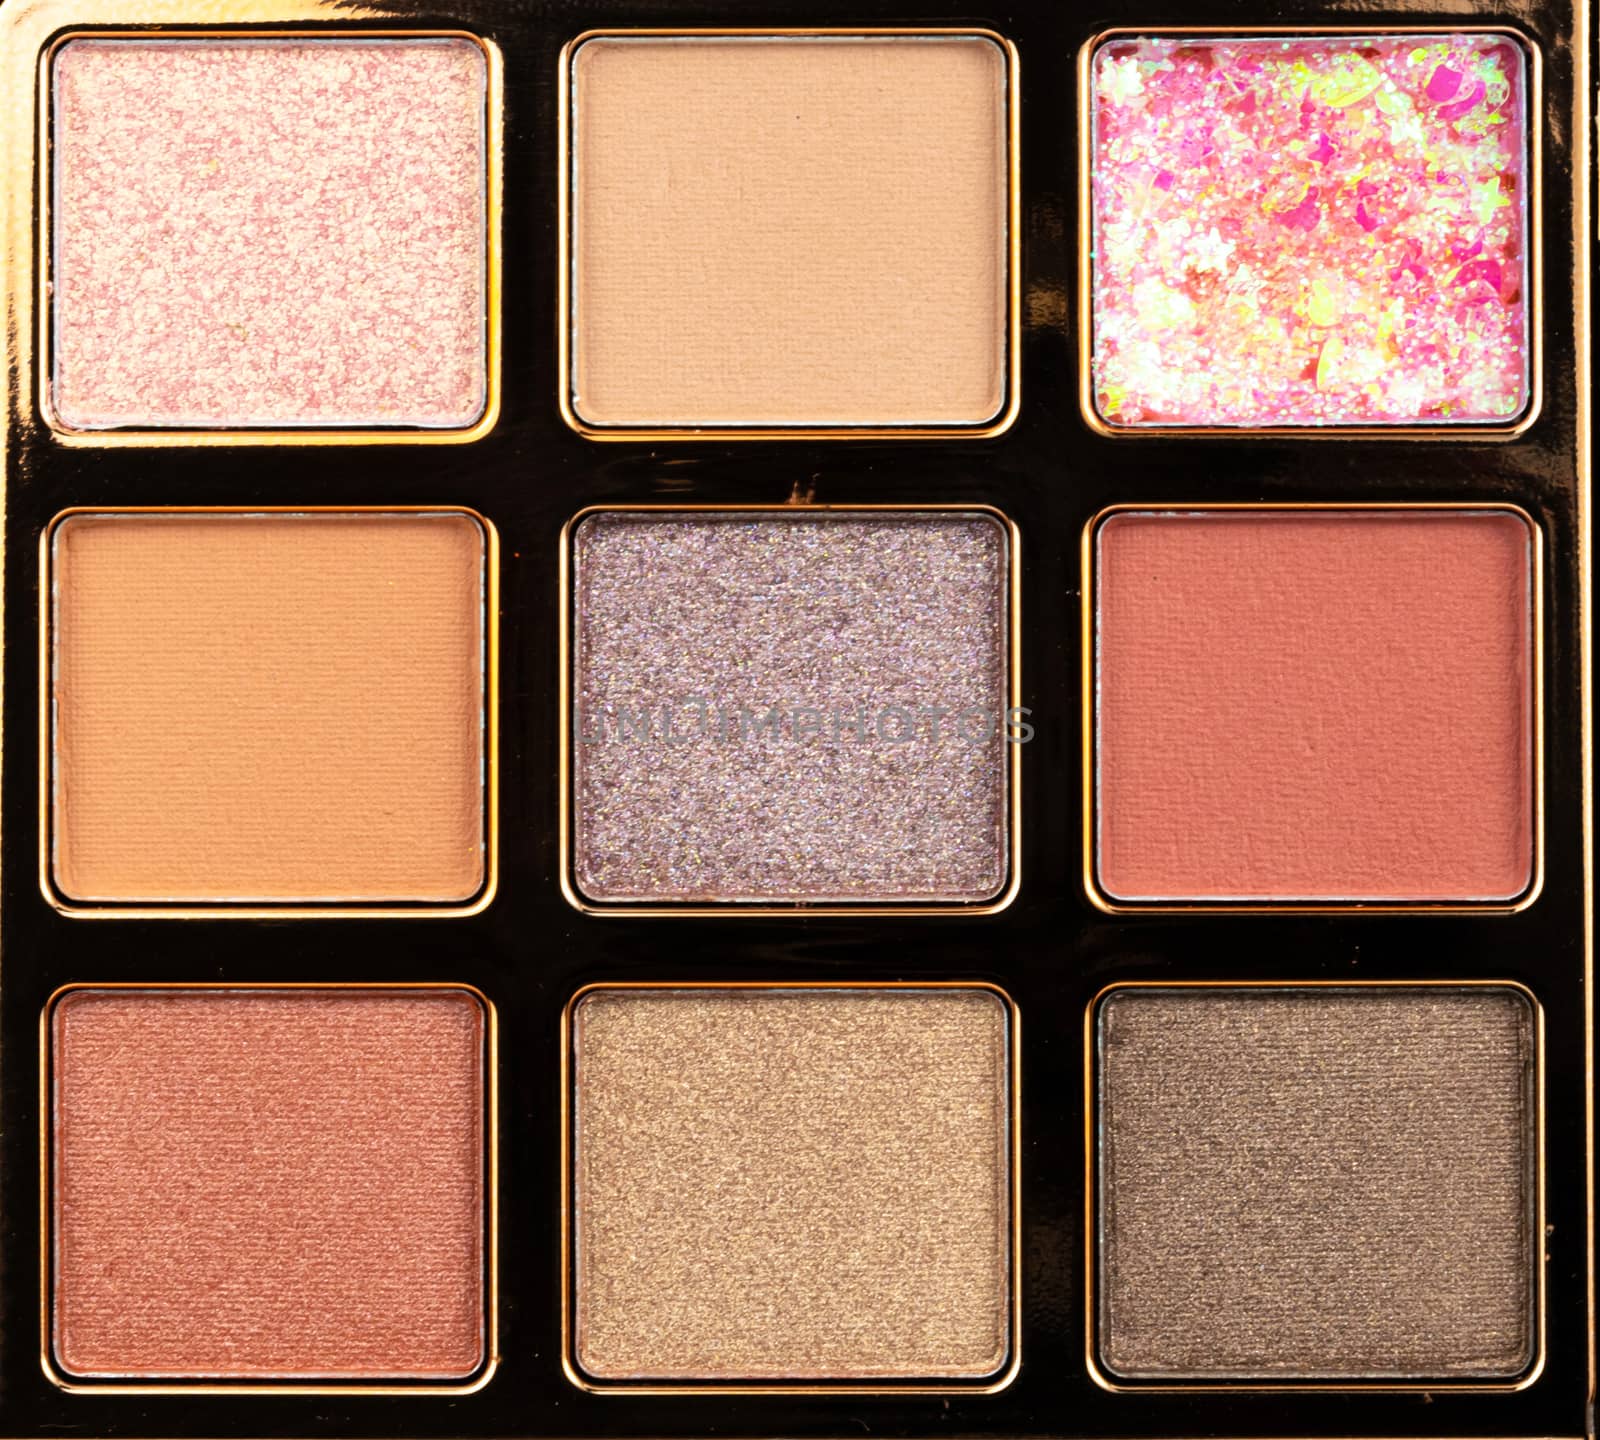 Palette of eyeshadows in Many colors tones by sompongtom